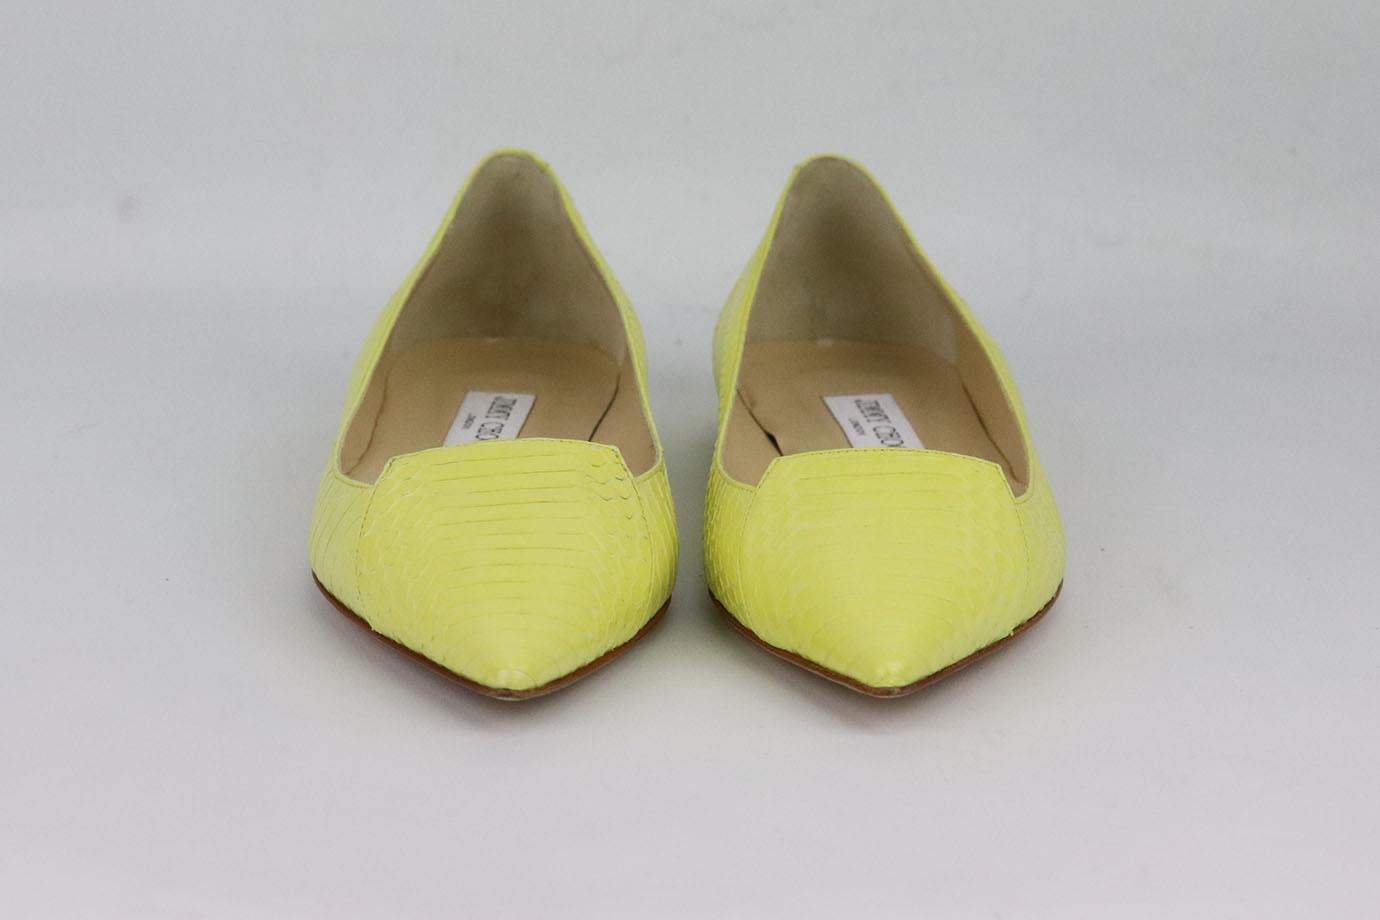 Jimmy Choo python pointed toe ballerina flats. Yellow python pumps with pointed toe and geometric shape at the toes. Yellow. Slips on. Does not come with box or dustbag. Size: EU 38.5 (UK 5.5, US 8.5). Heel: 0.4 in. Insole: 9.5 in